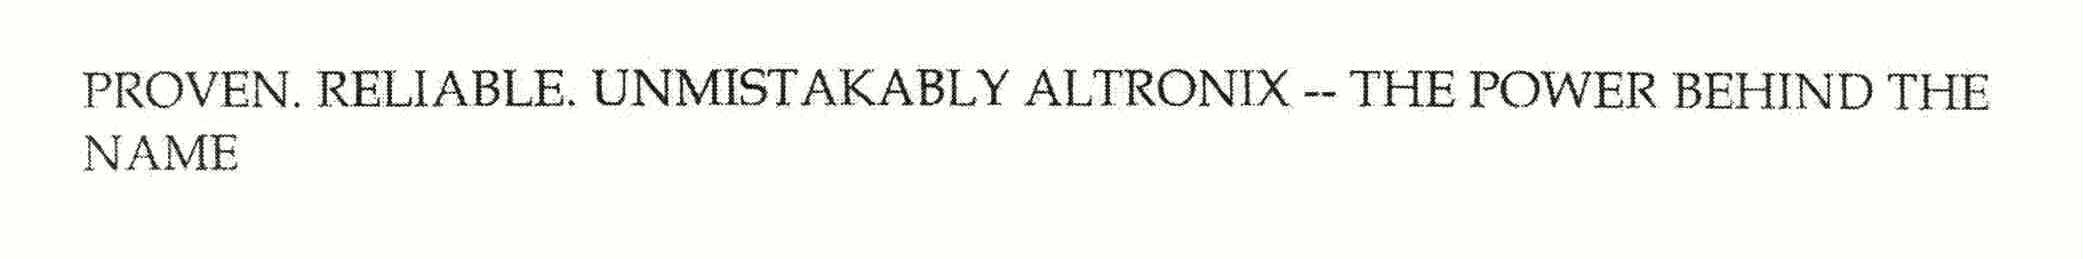 Trademark Logo PROVEN. RELIABLE. UNMISTAKABLY ALTRONIX -- THE POWER BEHIND THE NAME